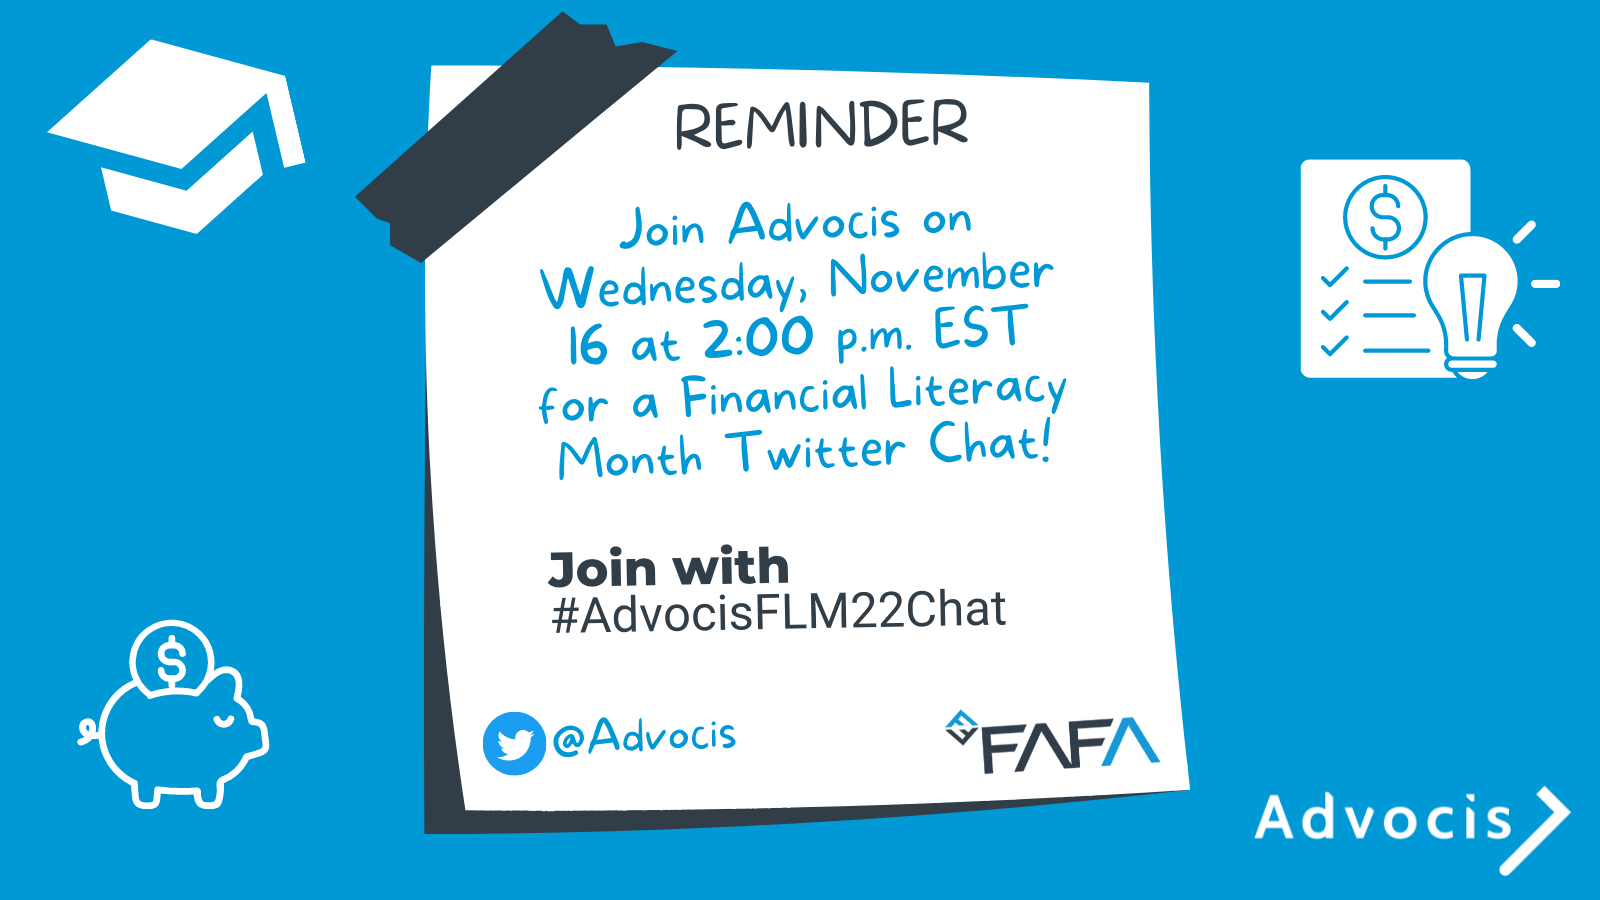 Join Advocis for a Financial Literacy Month Twitter Chat!